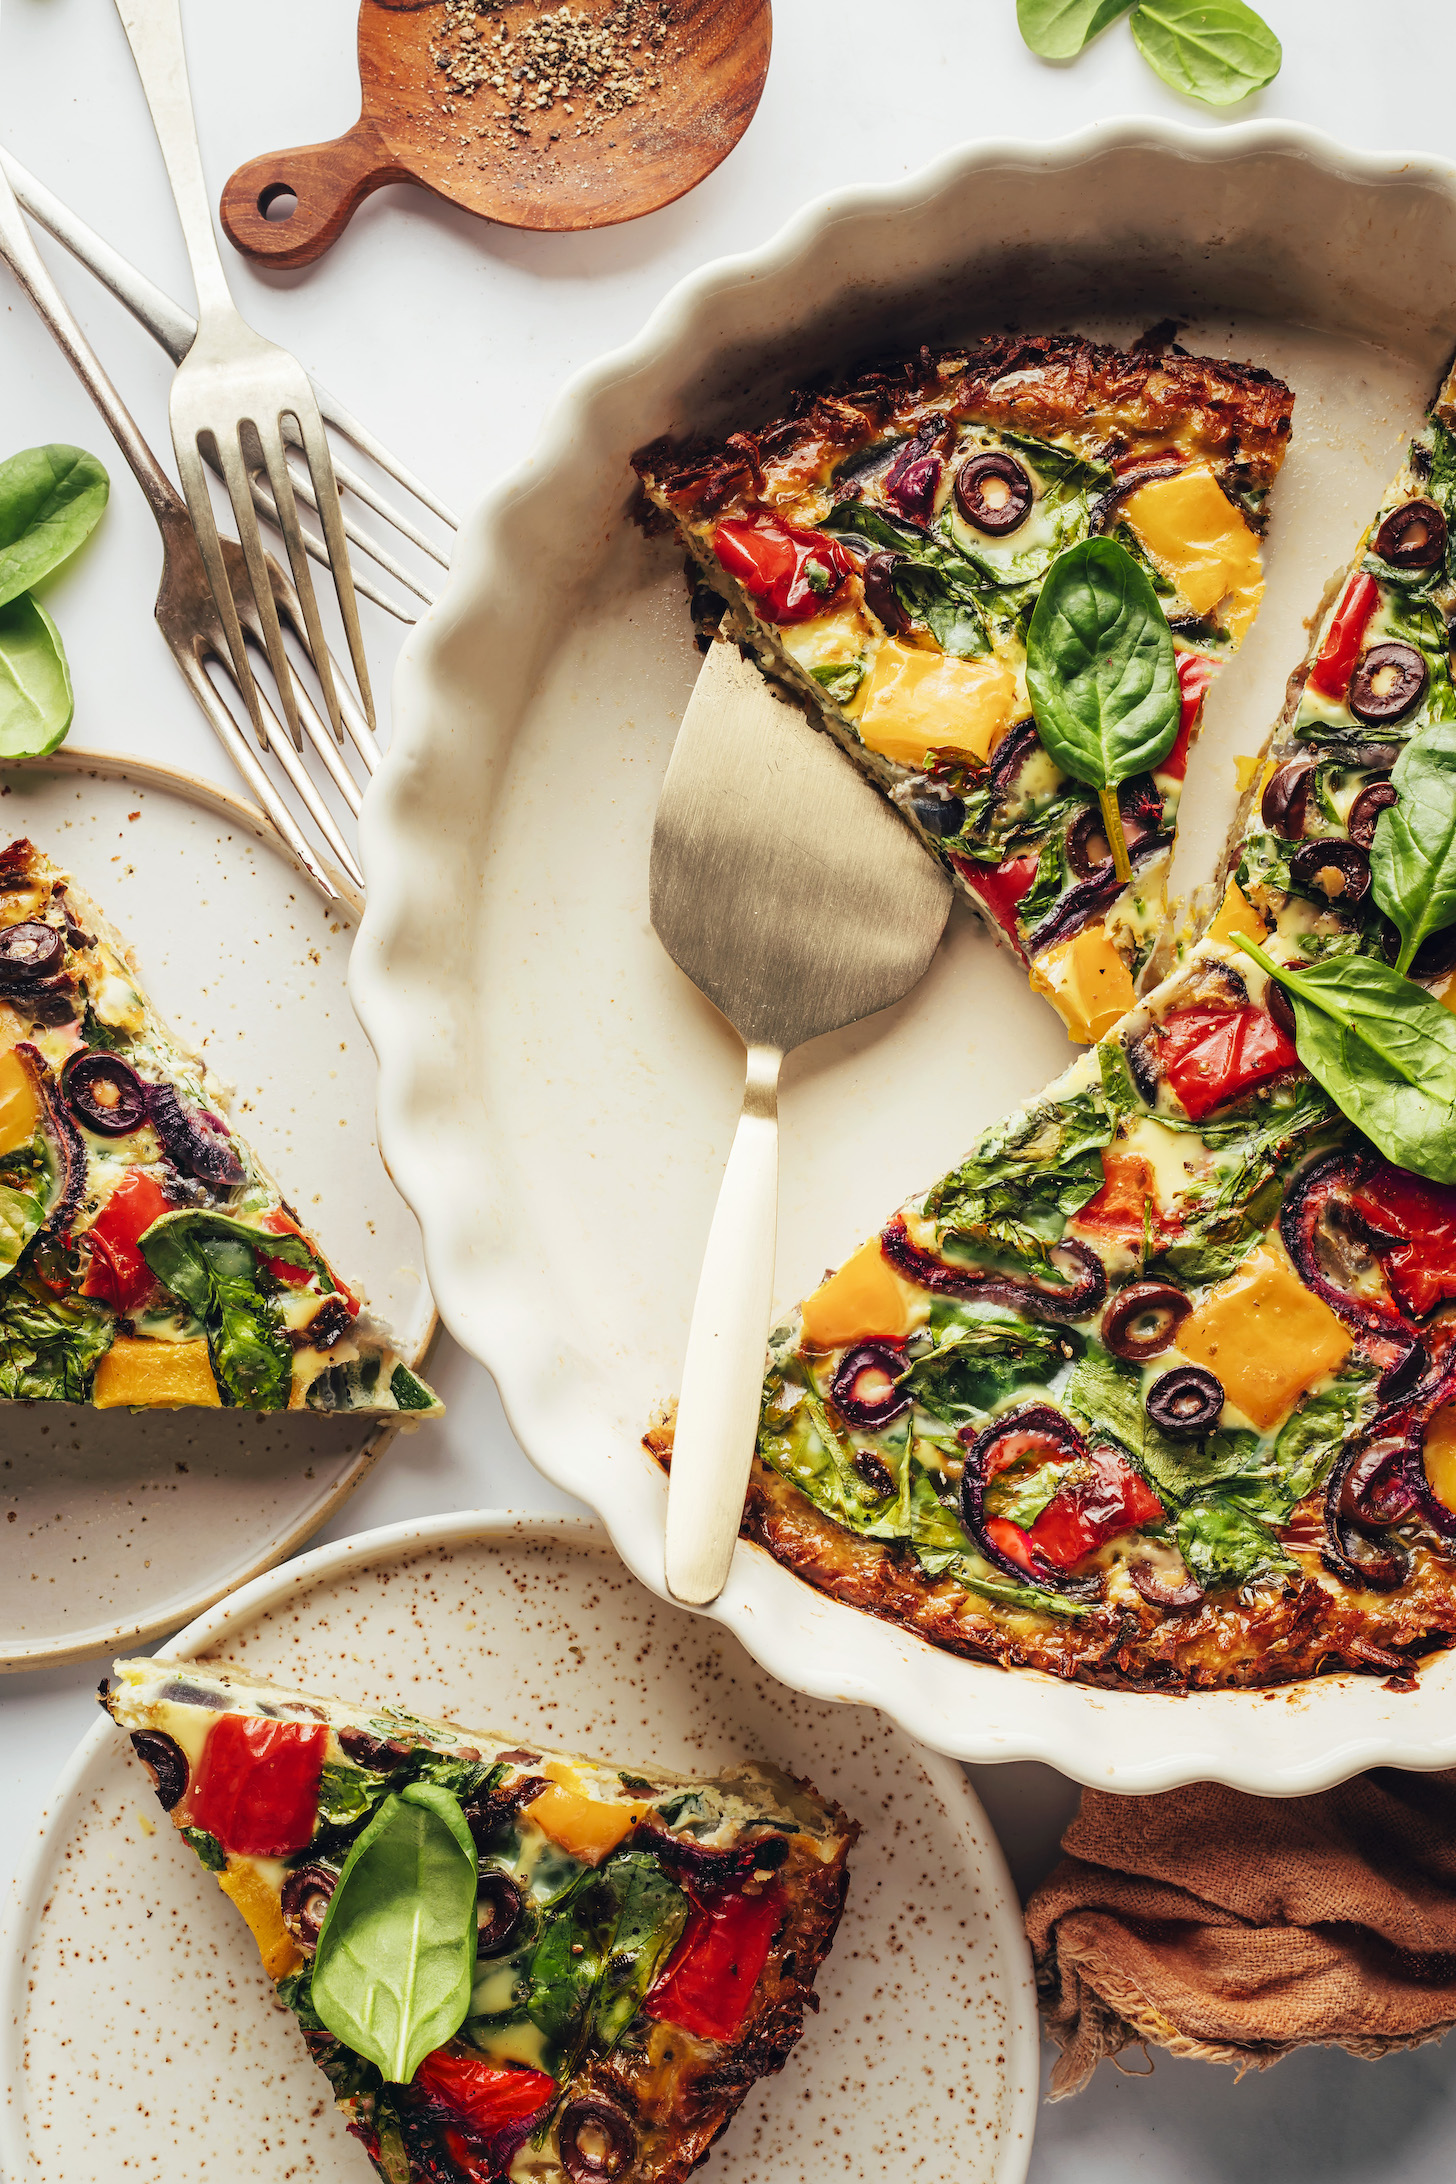 Slices of gluten-free dairy-free potato crust quiche on plates and in a pie pan